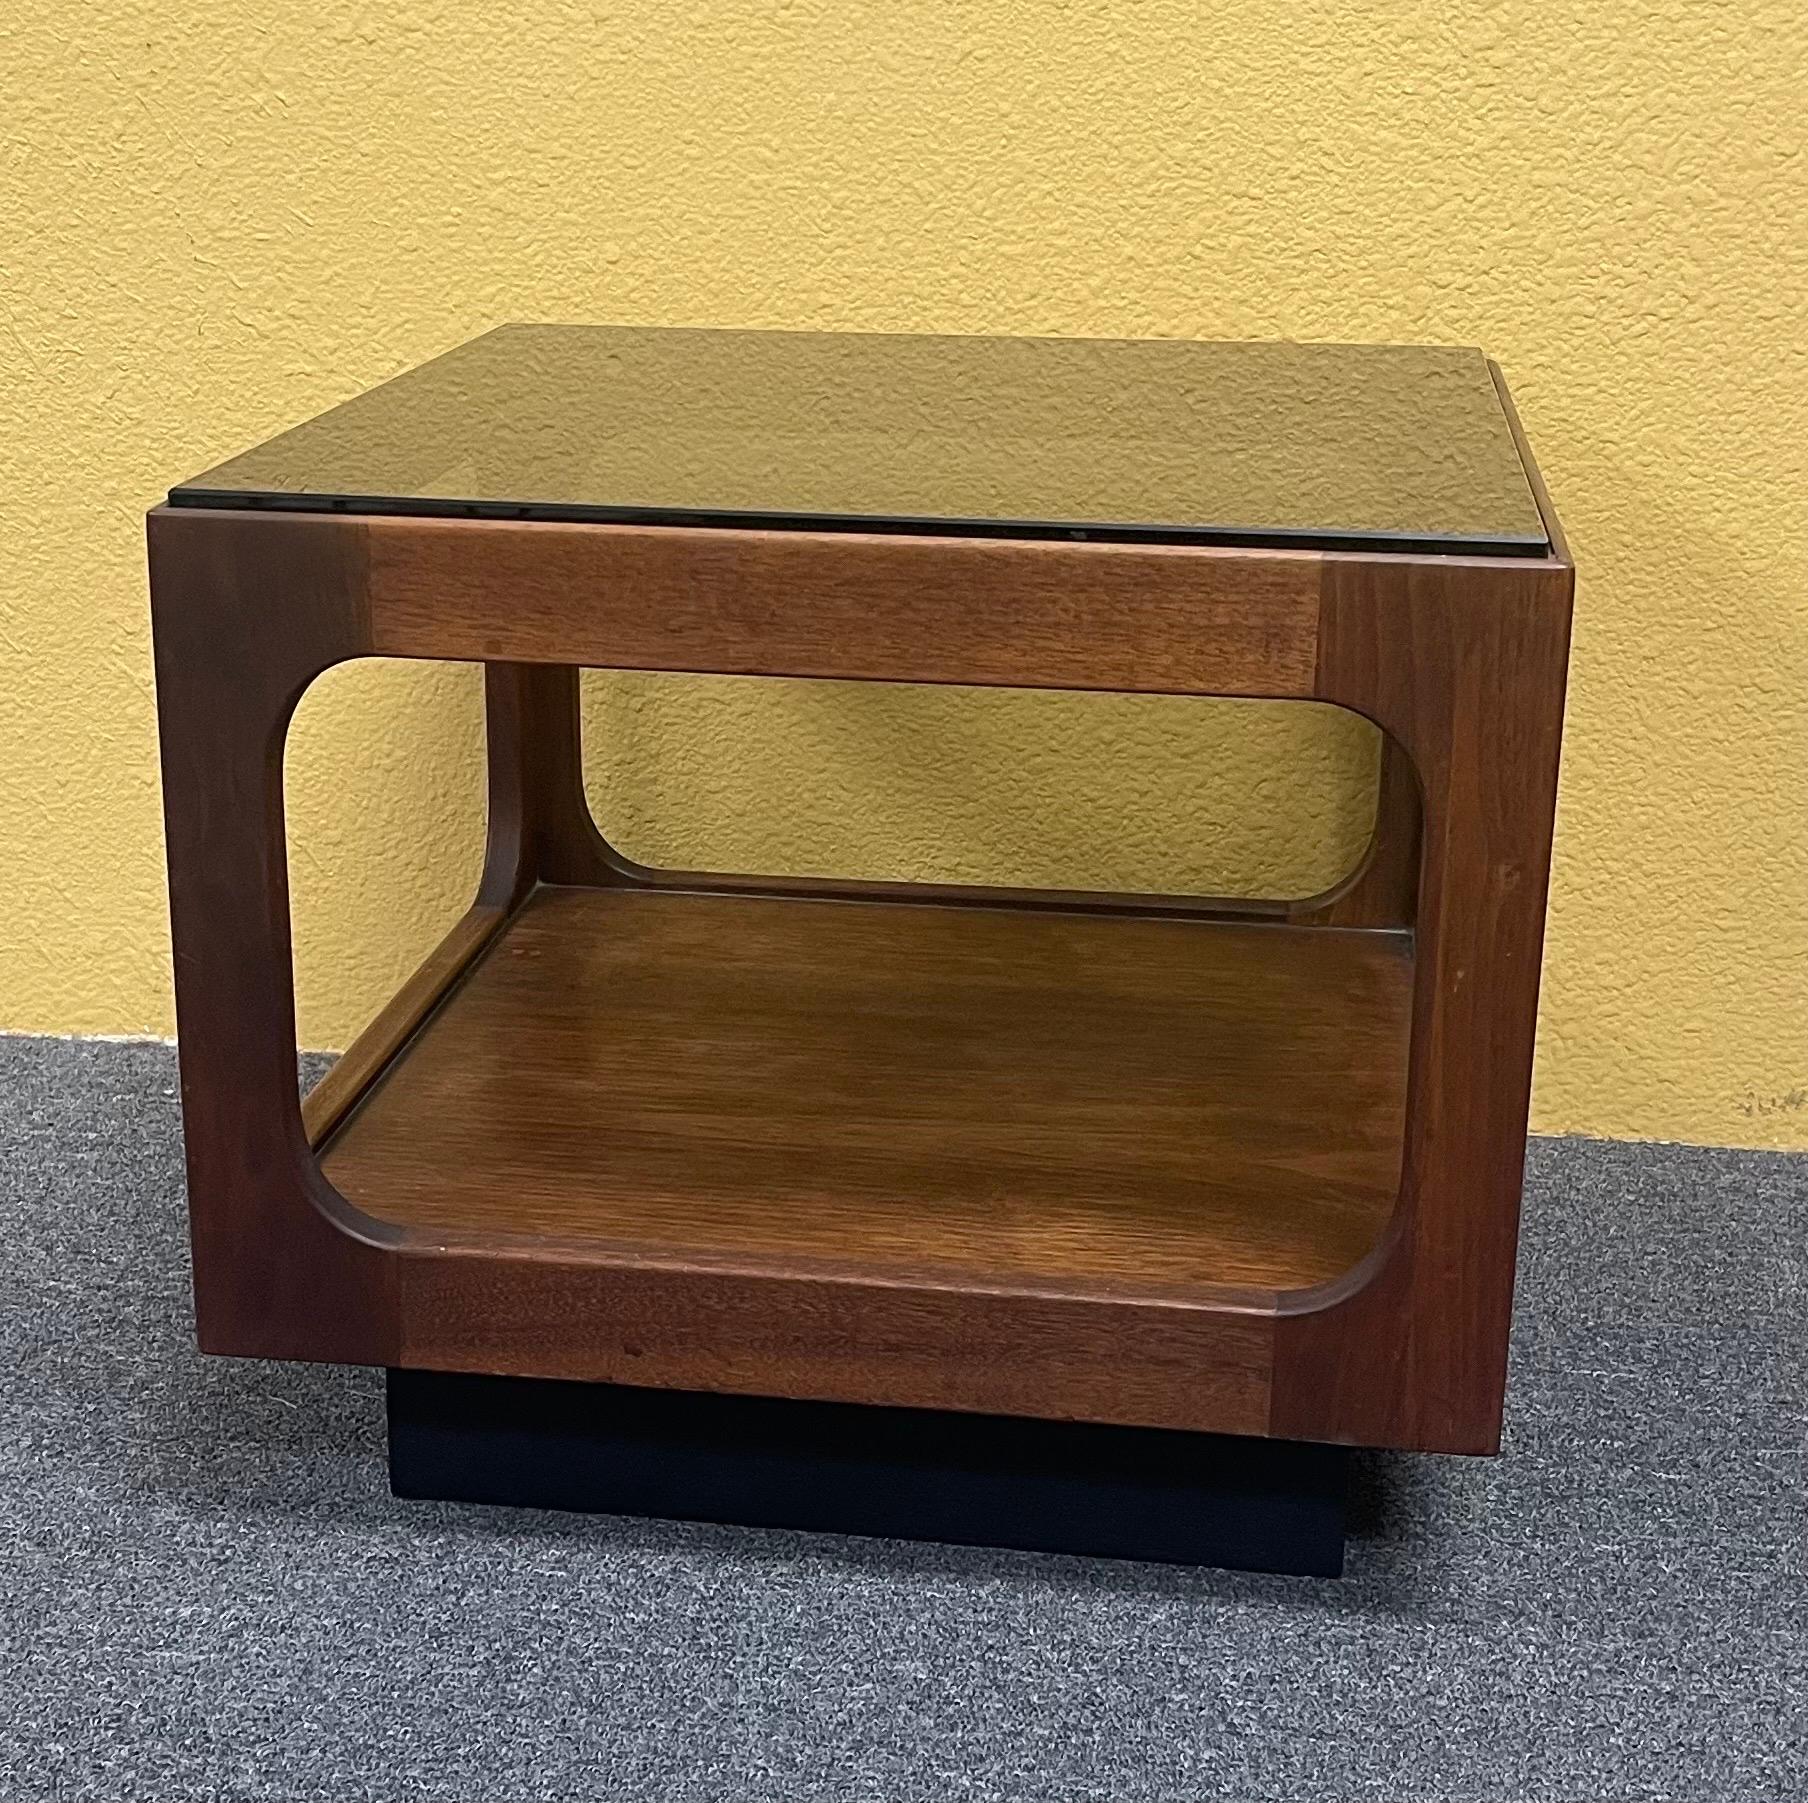 California Modern Smoked Glass Walnut End Table by John Keal for Brown Saltman In Good Condition For Sale In San Diego, CA